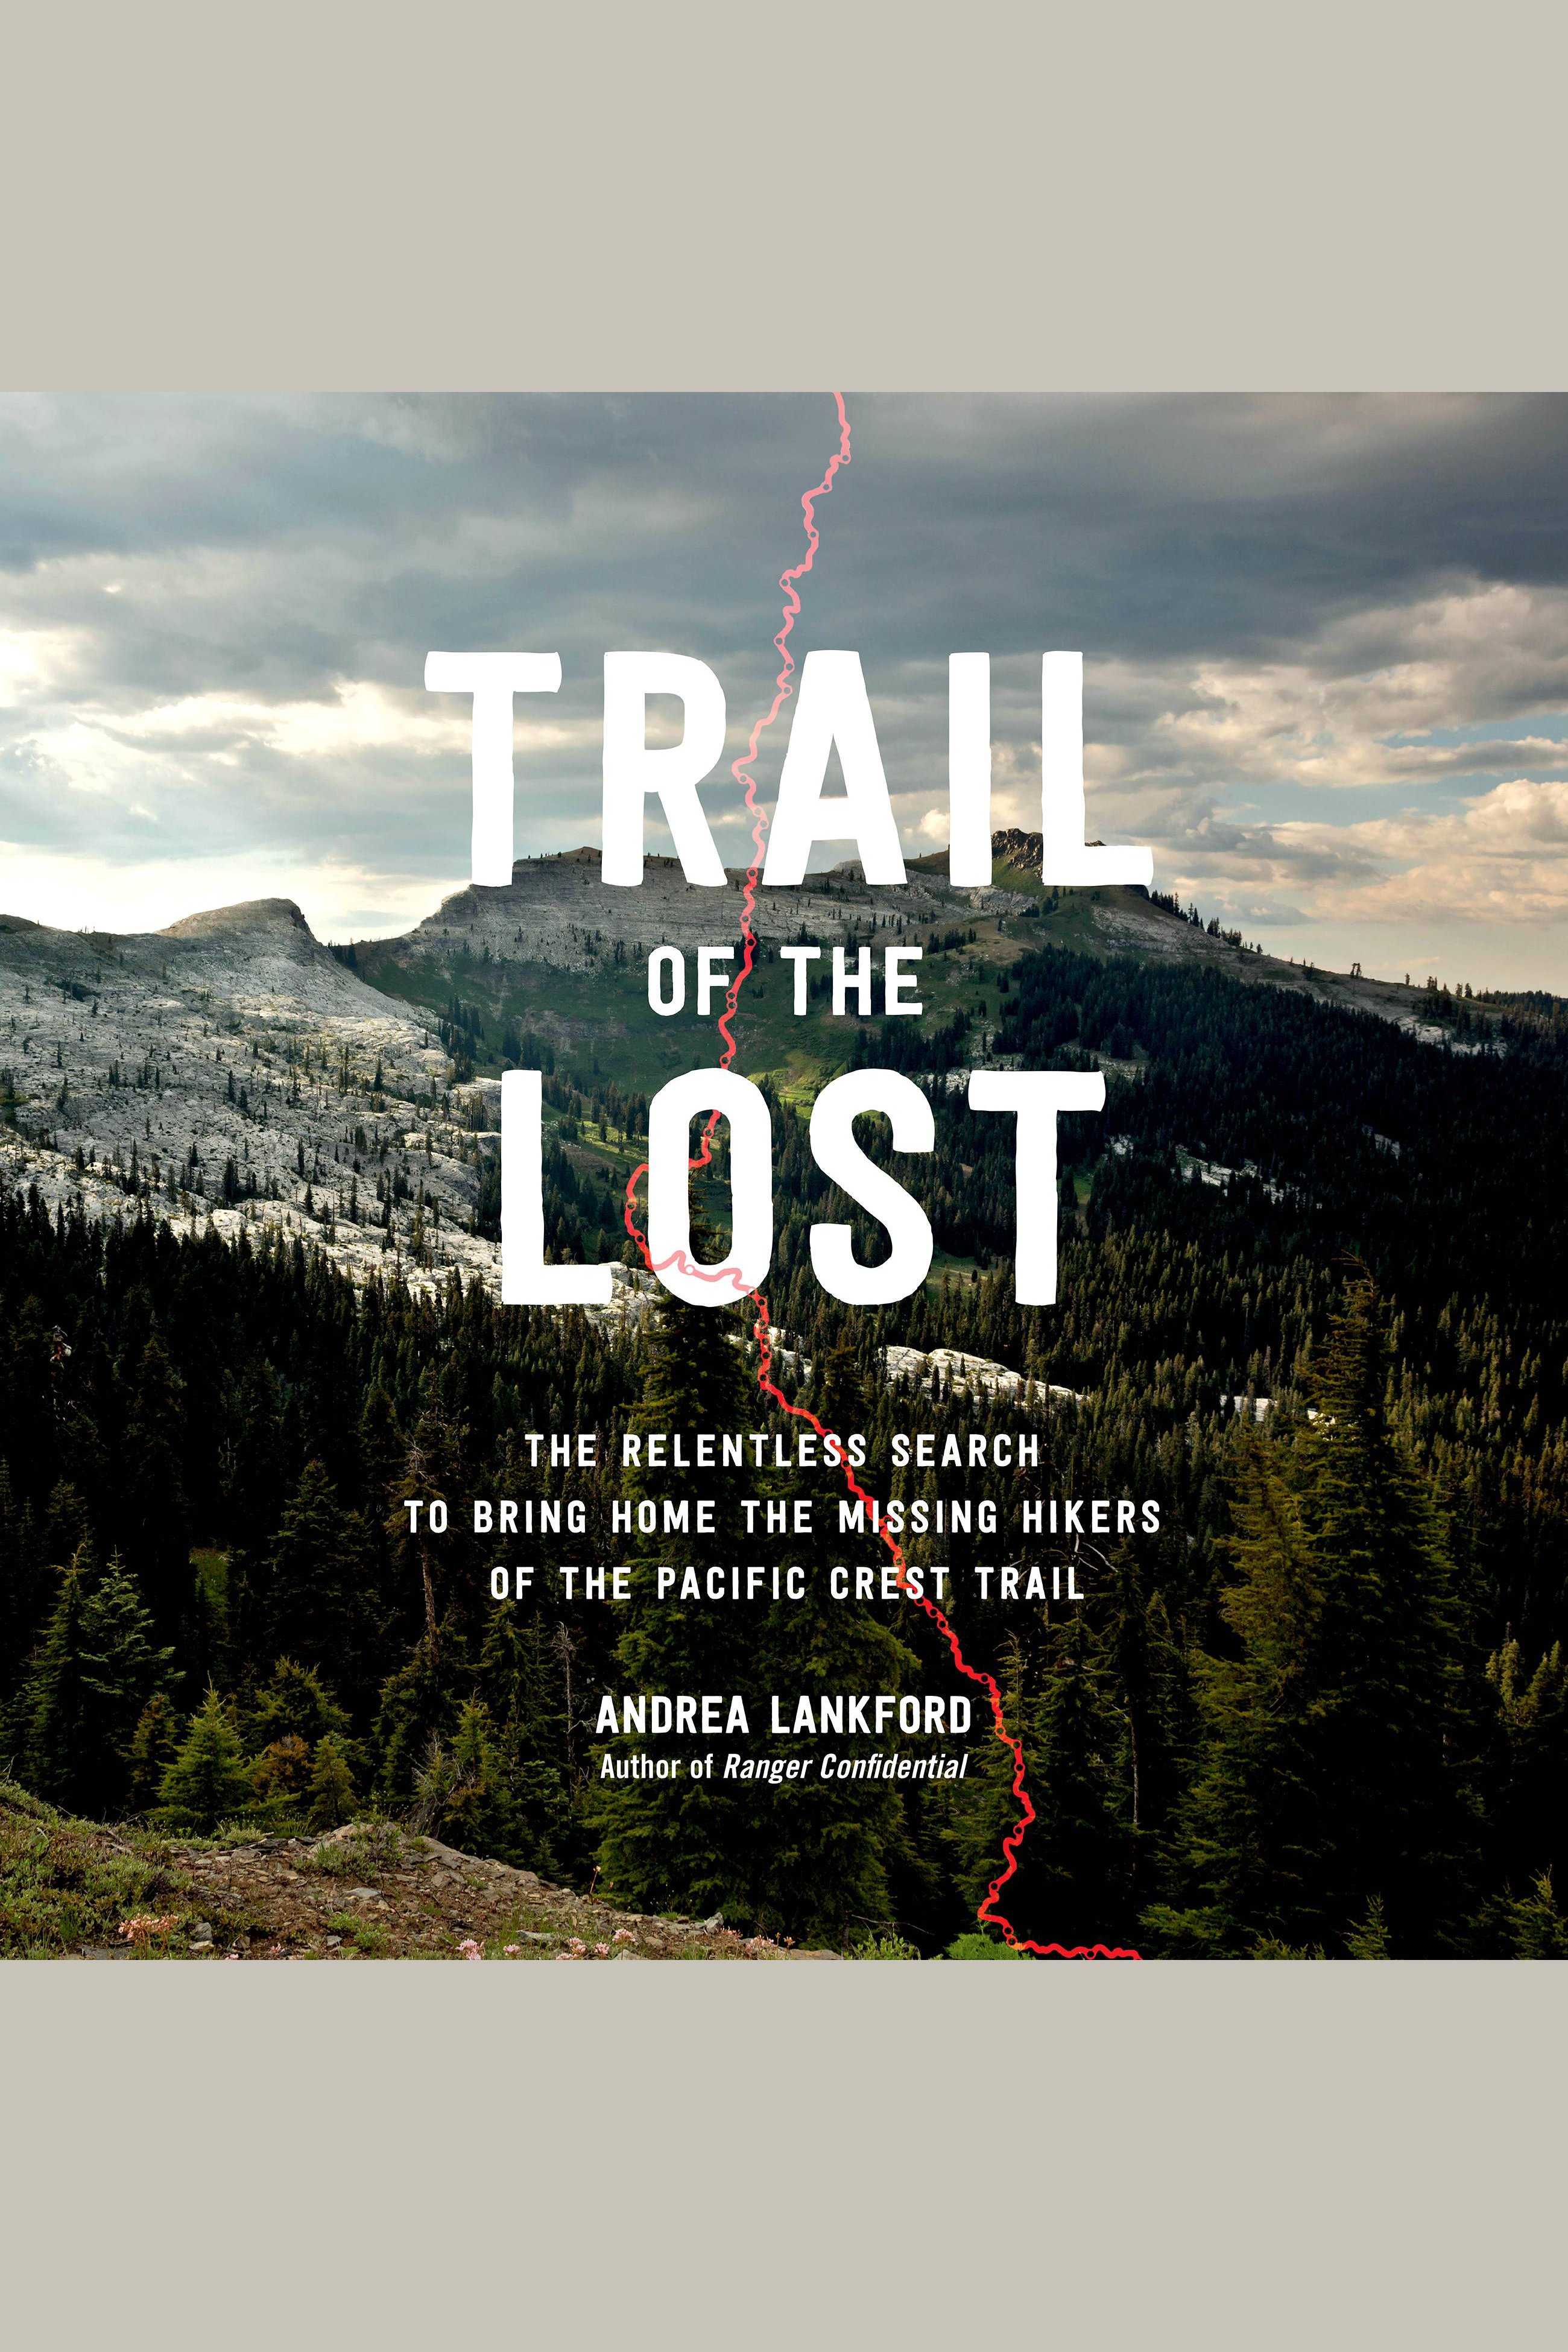 Trail of the Lost The Relentless Search to Bring Home the Missing Hikers of the Pacific Crest Trail cover image